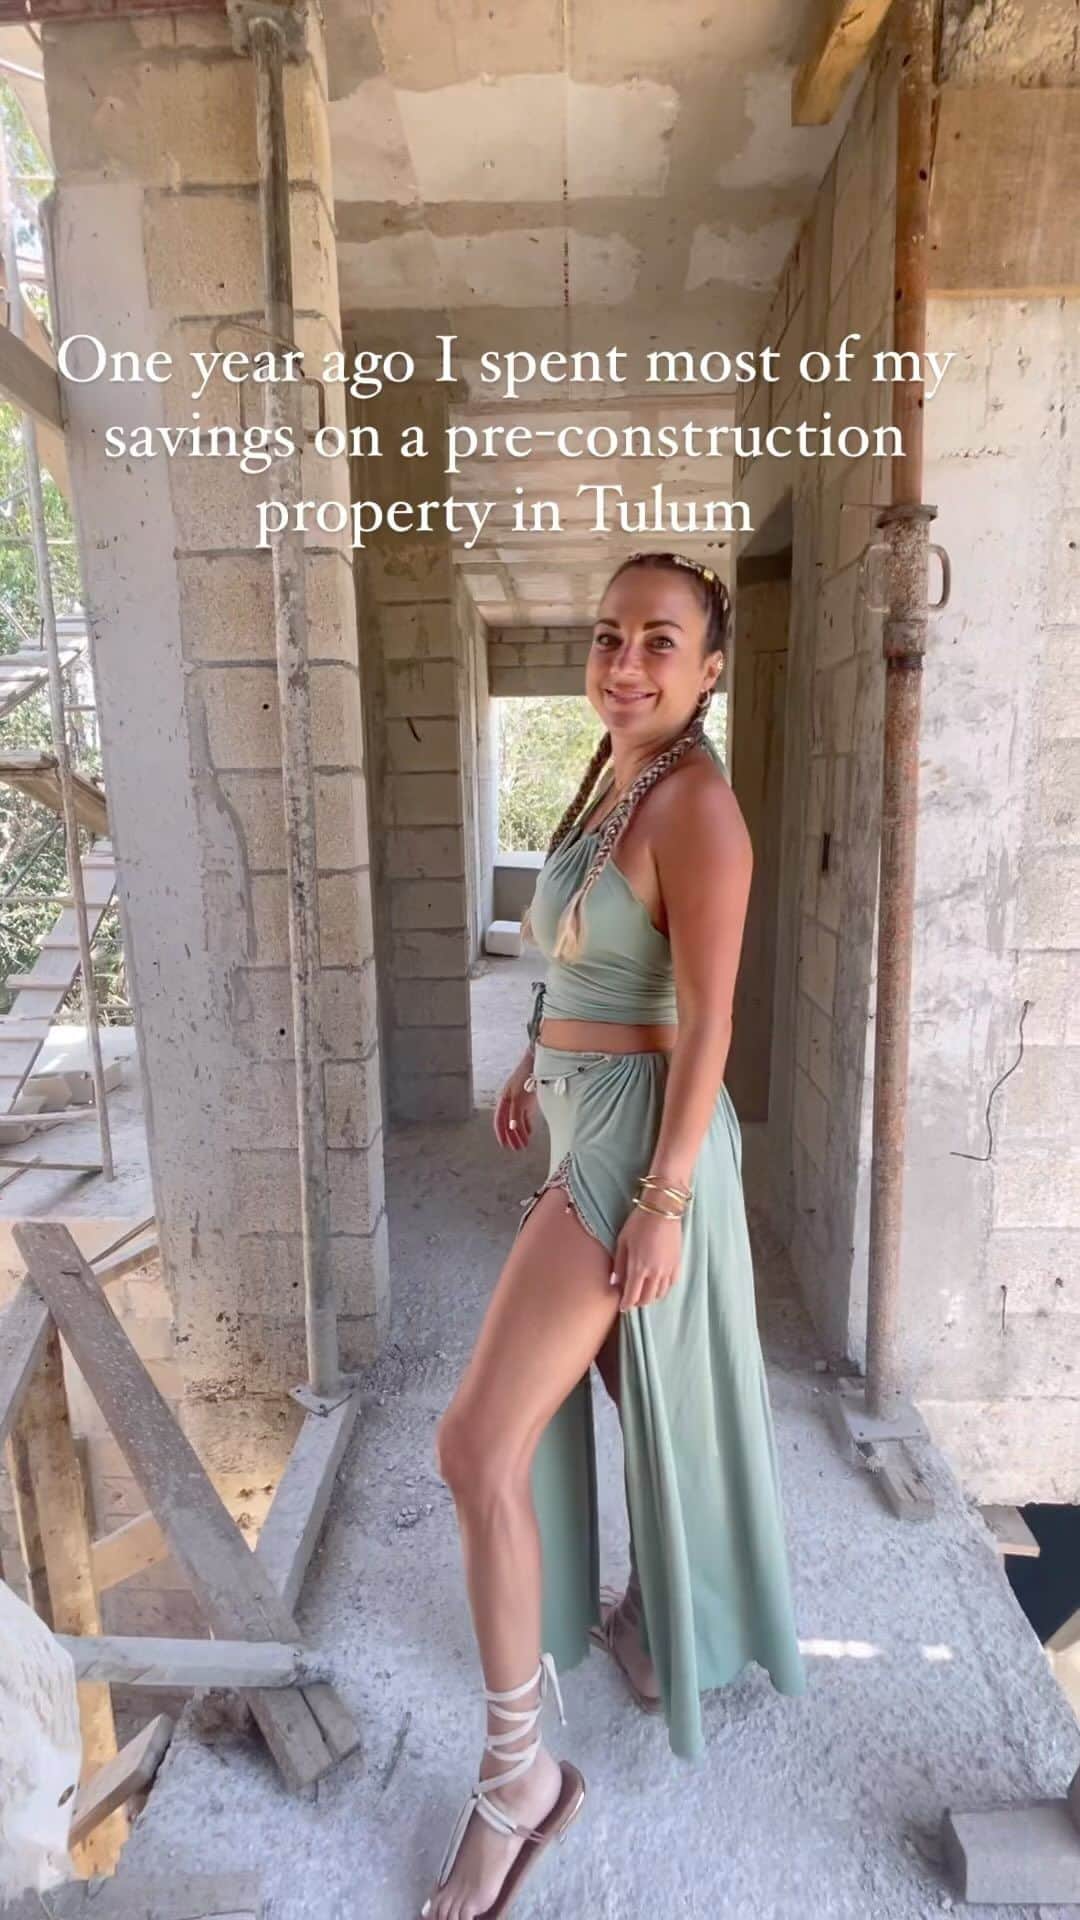 アリサ・ラモスのインスタグラム：「My condo in Tulum is officially complete!!! What an interesting and exciting process this has been buying a property in another country (not that I have anything to compare it to), and as a pre-construction!  I also still can’t get over the fact that I was able to buy my dream apartment, in one of the most famous cities in the world, in cash with money I earned from the business I created out of traveling the world! And people think traveling makes you go broke…just remember this post!  I know not everyone can or wants to do what I do (travel blogger/influencer) but to be honest, it wasn’t WHAT I do that got me here! I was able to save up a ton of money simply just by not living in USA or other expensive countries! For years I’ve been nomadic and staying in countries that are drastically cheaper, therefore I have more to save! Anyone can do it if you can work remotely!  Anyway! Buying property in Mexico is easy. I did it through a team of lawyers and a bank trust. My building owner is also cool and very helpful, which is how I figured out the wifi, electric, etc.  Will have a full walkthrough soon, and FYI they’re building a second phase! Who wants to be my neighbor??? 😜  I plan to live here about 5-6 months per year depending on my work/travel schedule, so if anyone is interested in renting it (preferably long term) lmk. It comes with a beach cruiser and potentially a super cool motorbike 🛵  For more info on my experience and on buying real estate in Mexico PLEASE read my blog posts and videos! I spend a lot of time on them & don’t have time to answer DMs privately abt things I took a lot of time to post about 😬  Now off to Europe to look for my second property!! Goal is owning 4 international properties by 40! 💪  Never forget my motto: “Dreams don’t work unless YOU DO!”  #realestate #mexicorealestate #tulum #tulumrealestate #mylifesatravelhome #mylifesatravelmovie #casitalyssa #dreamsdontworkunlessyoudo #femalebusinessowner #solofemaletravel #solotravel #womenempowerment #homeowner #interiordesign」